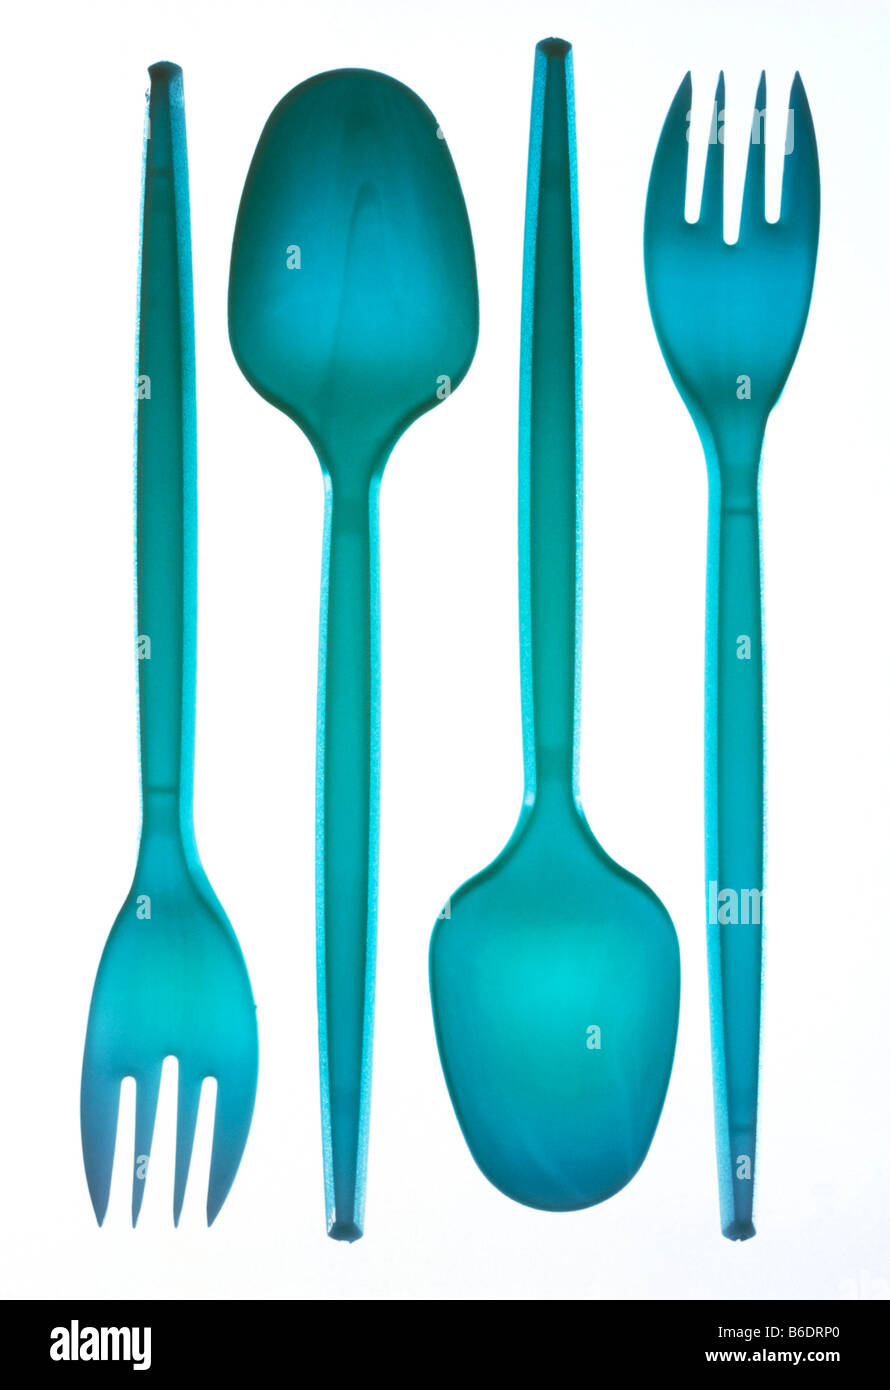 Plastic cutlery. Spoons and forks made of plastic. Stock Photo